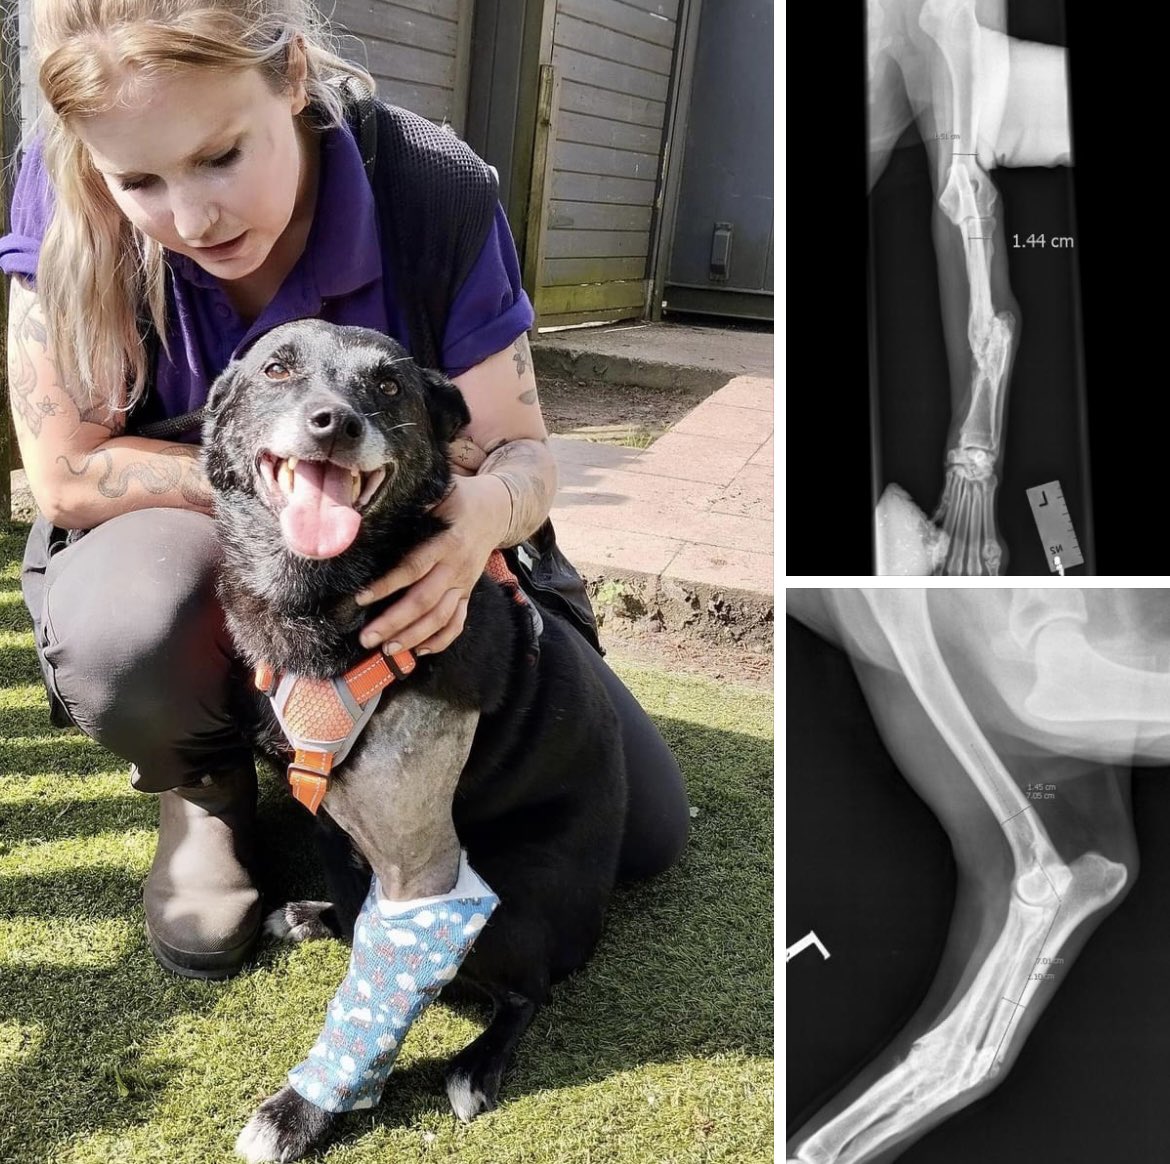 Precious Errol had his operation to straighten his remaining front leg. If anyone could spare a pound or two towards the £4,000 cost we’d be so very grateful 🙏 dogs4rescue.co.uk/donate Surgery was the only course of action to give this boy the chance of a pain-free life. The